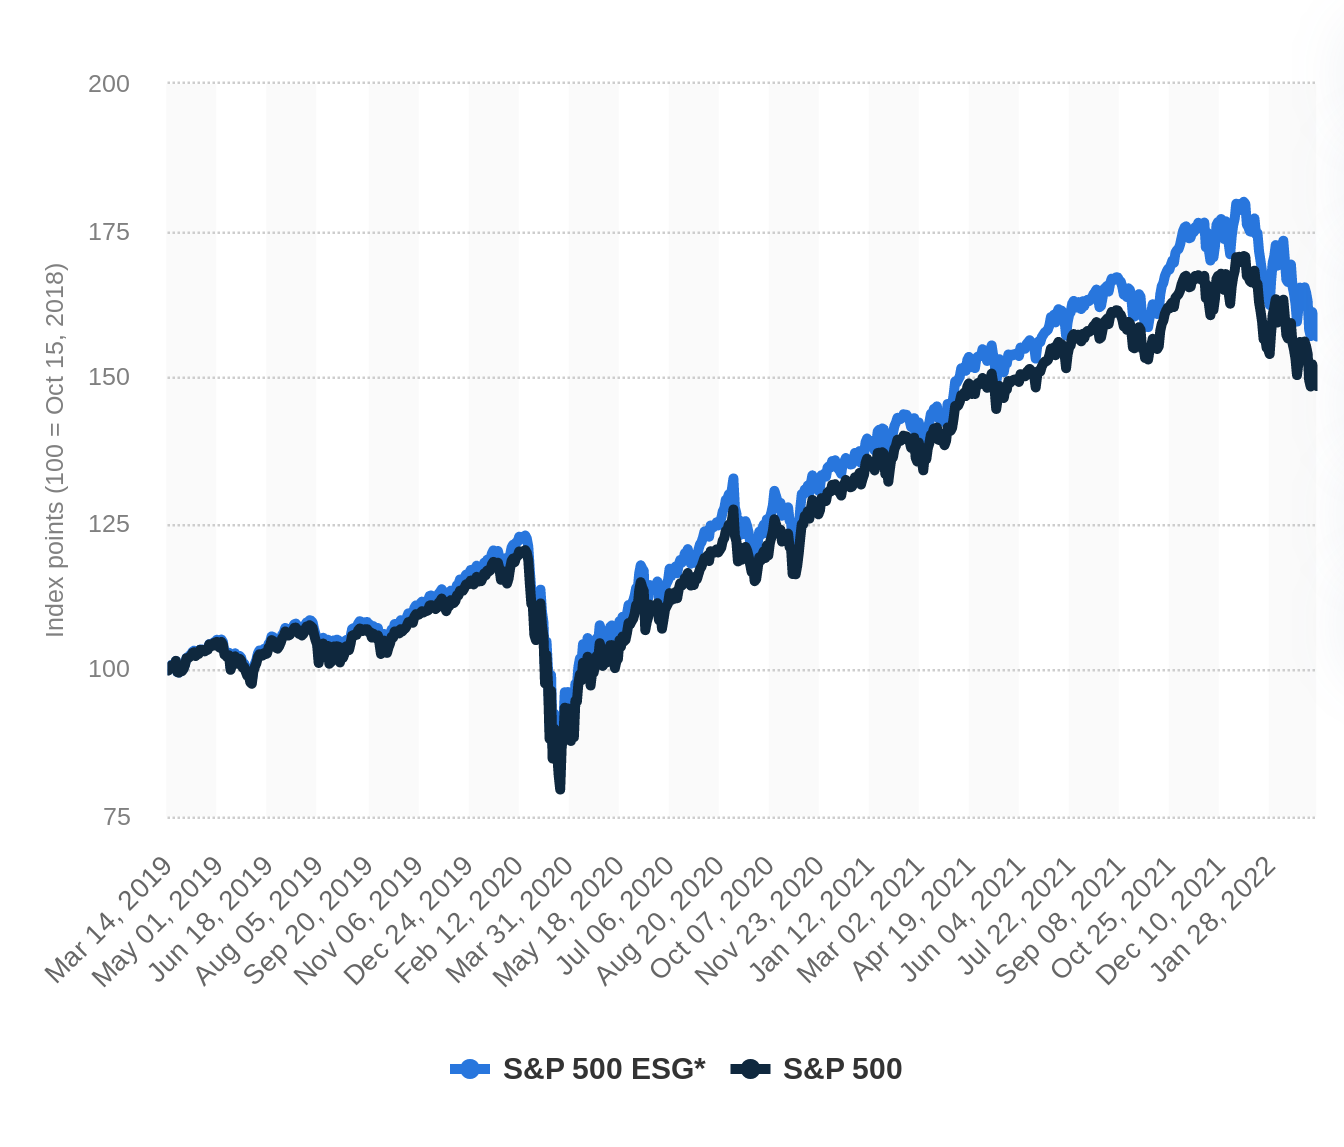 A chart comparing the returns of the ESG Index versus the S&P 500 over time